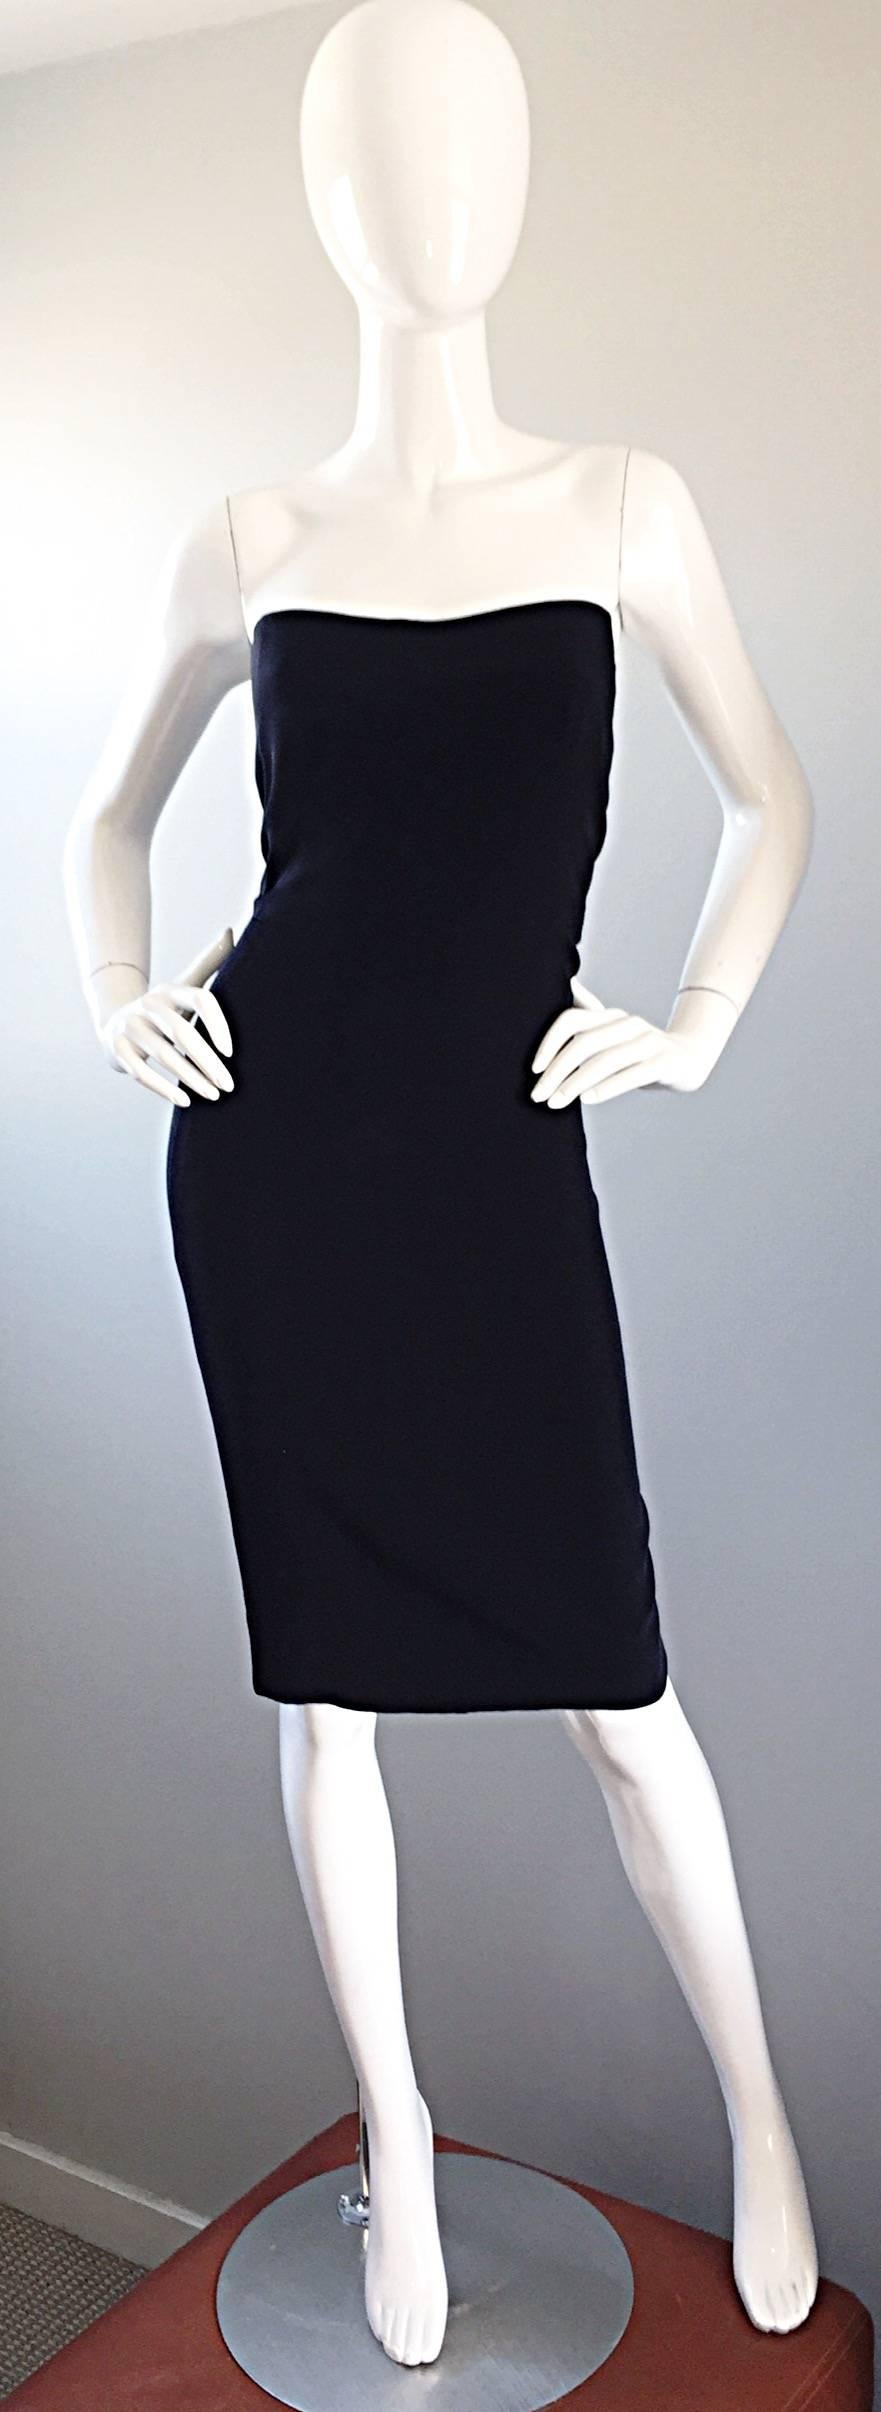 Spectacular vintage JAMES PURCELL demi couture silk little black dress! Sharp strapless neckline, that is uber flattering on the shoulders! So much attention to detail was implemented on this amazing gem! Heavy attention to detail and hand-sewn